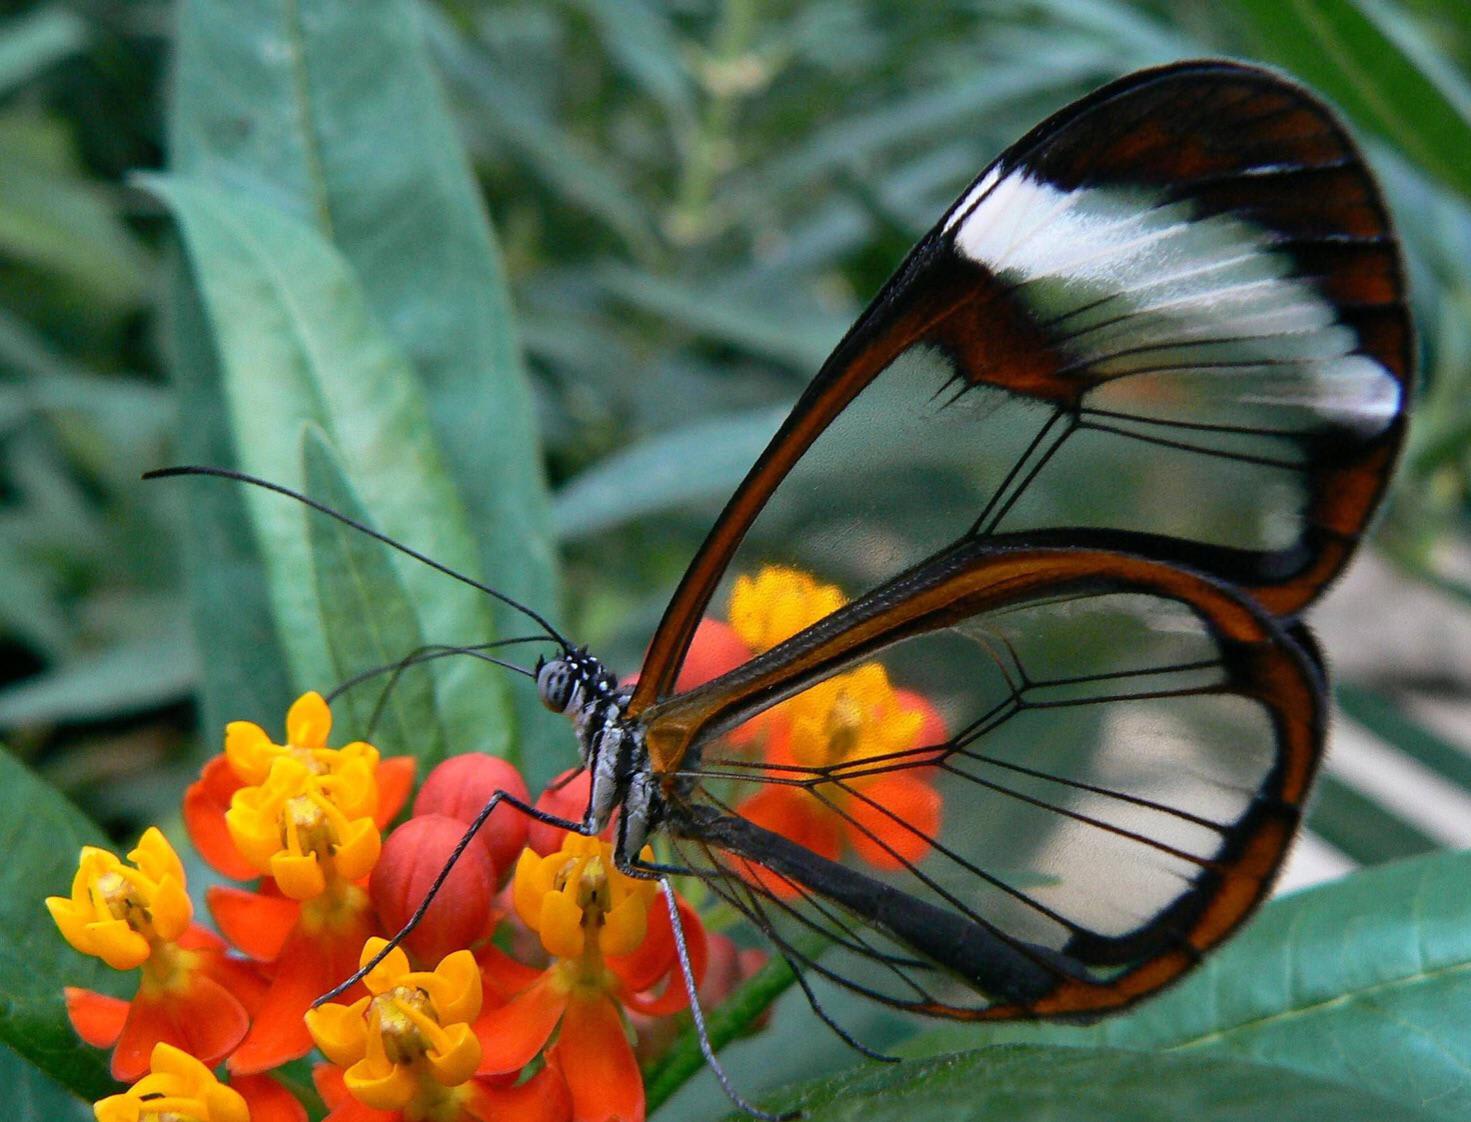 Greta oto, or glasswing butterflies, have transparent wings that allow for effective camouflage without extensive colouration. Despite their wings looking delicate, they can carry up to 40 times their own weight!